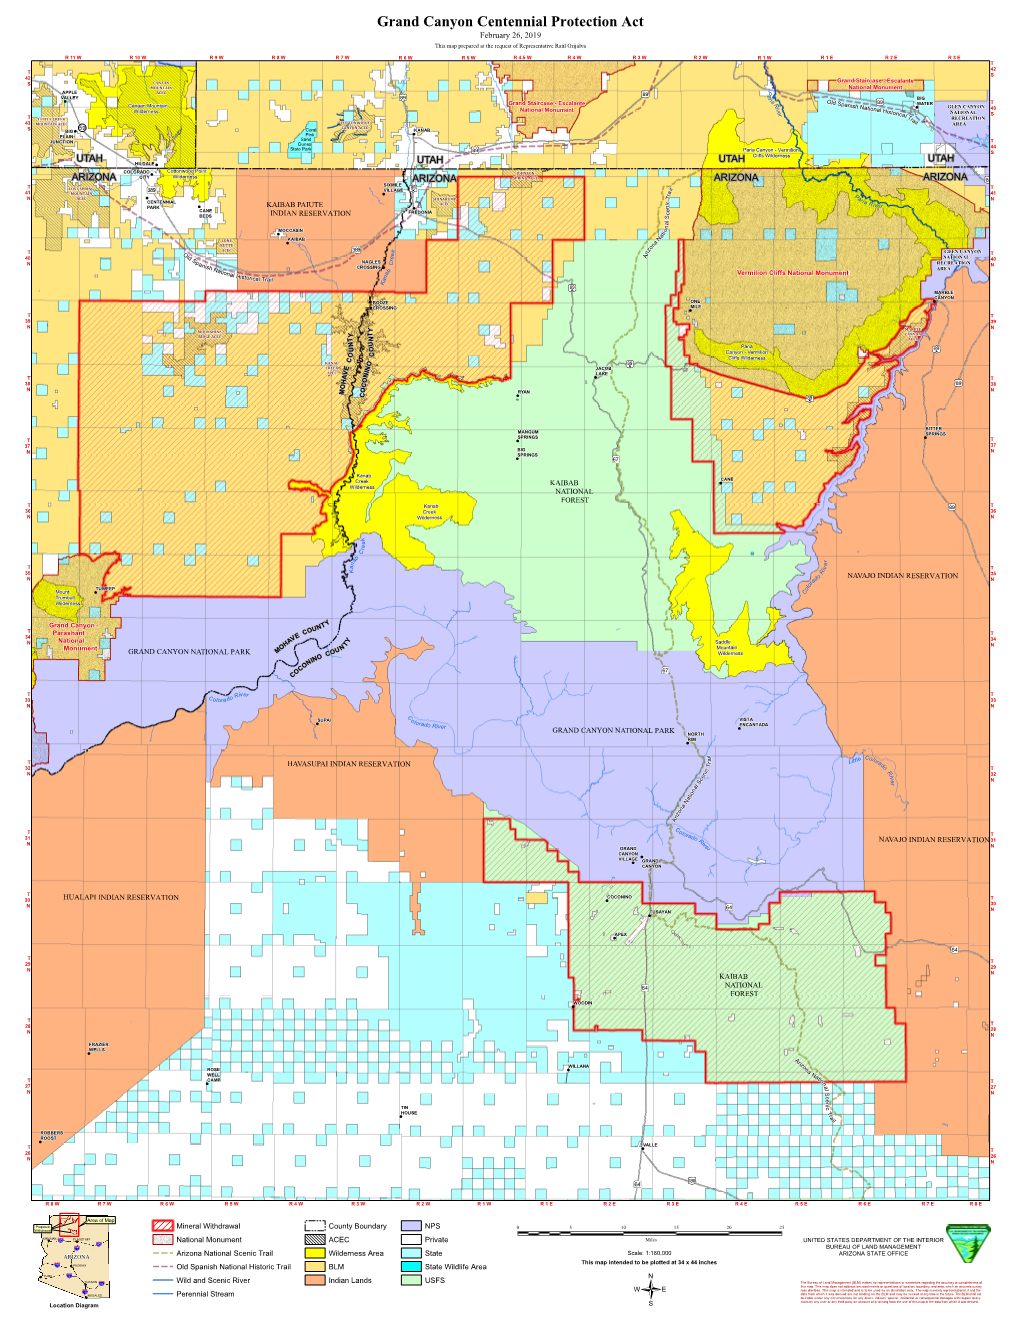 Grand Canyon Centennial Protection Act February 26, 2019 This Map Prepared at the Request of Representative Raúl Grijalva